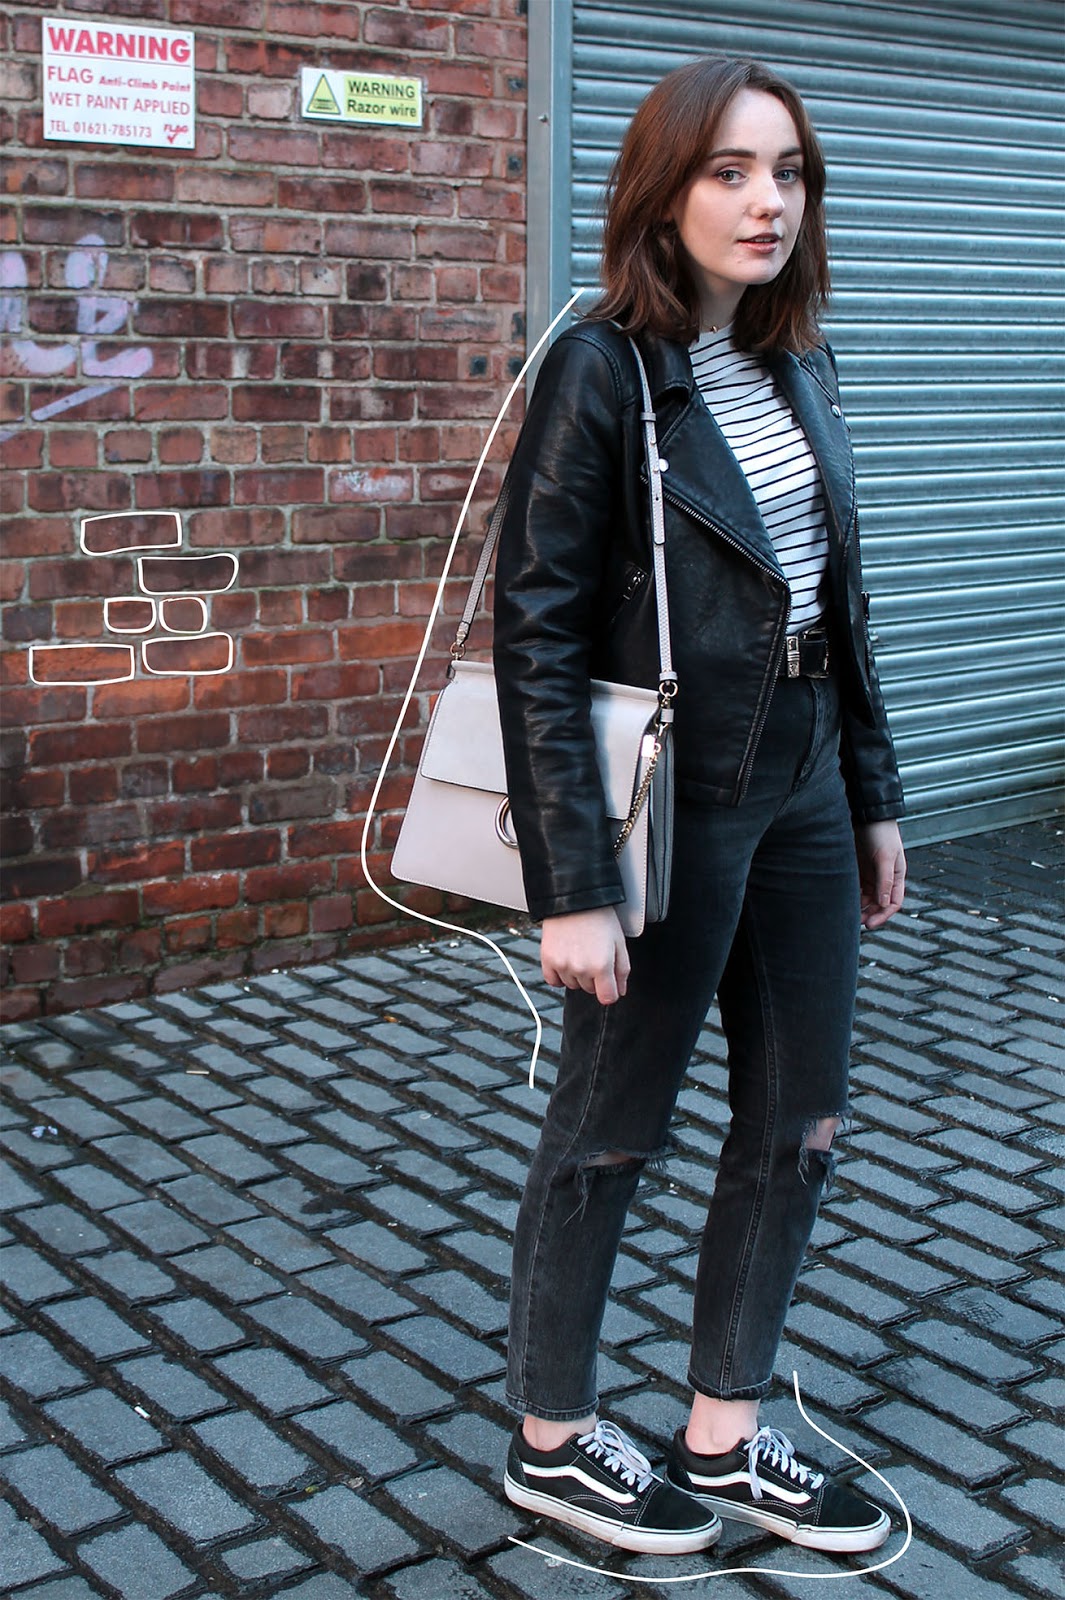 Liverpool blogger in topshop leather jacket, striped top, chloe faye bag, asos farleigh jeans and old skool vans